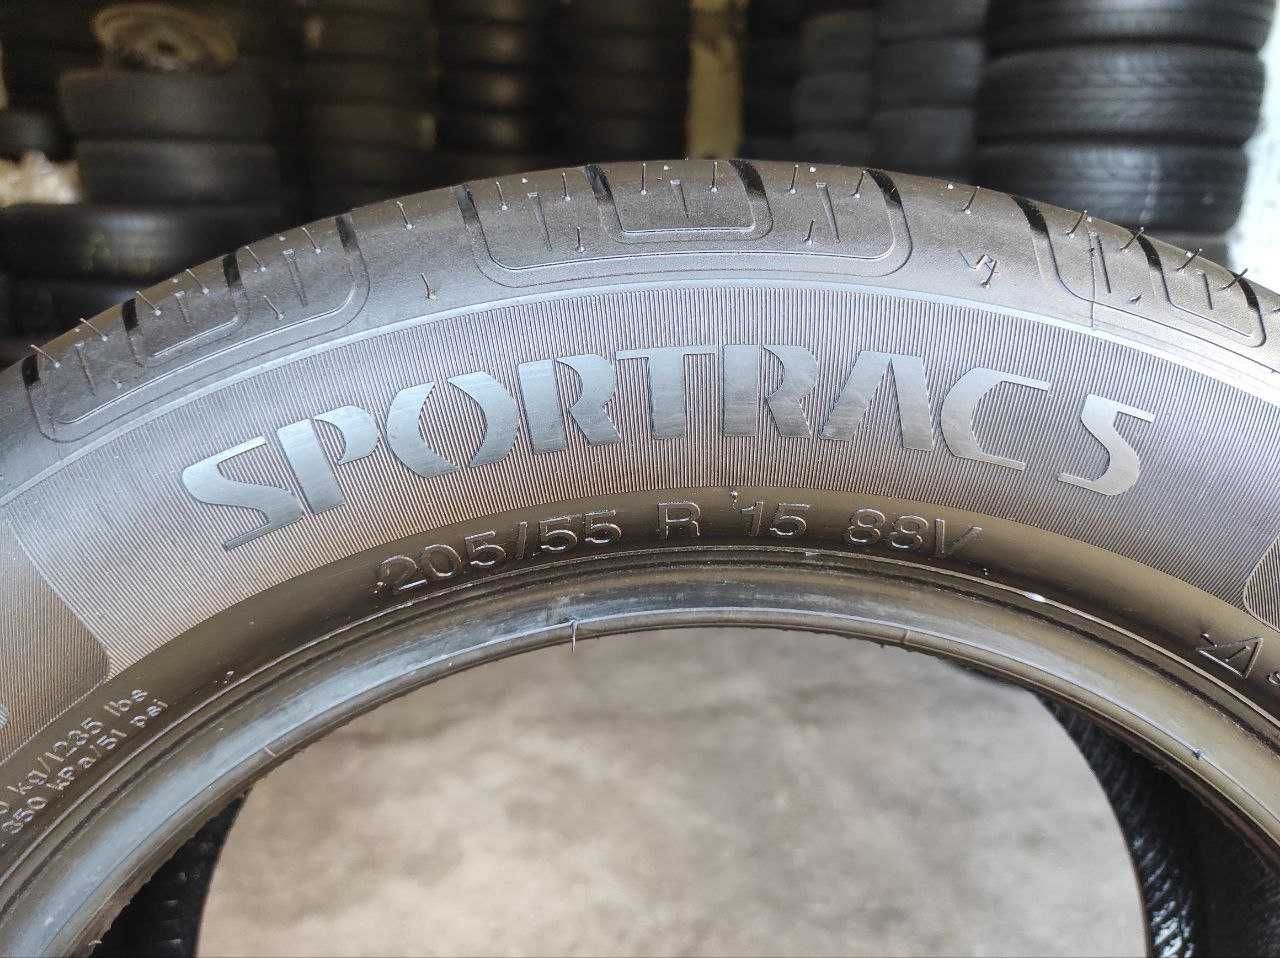 Vredestein Sportrac 5 205/55r15 made in The Netherlands 16год, 7,3мм,